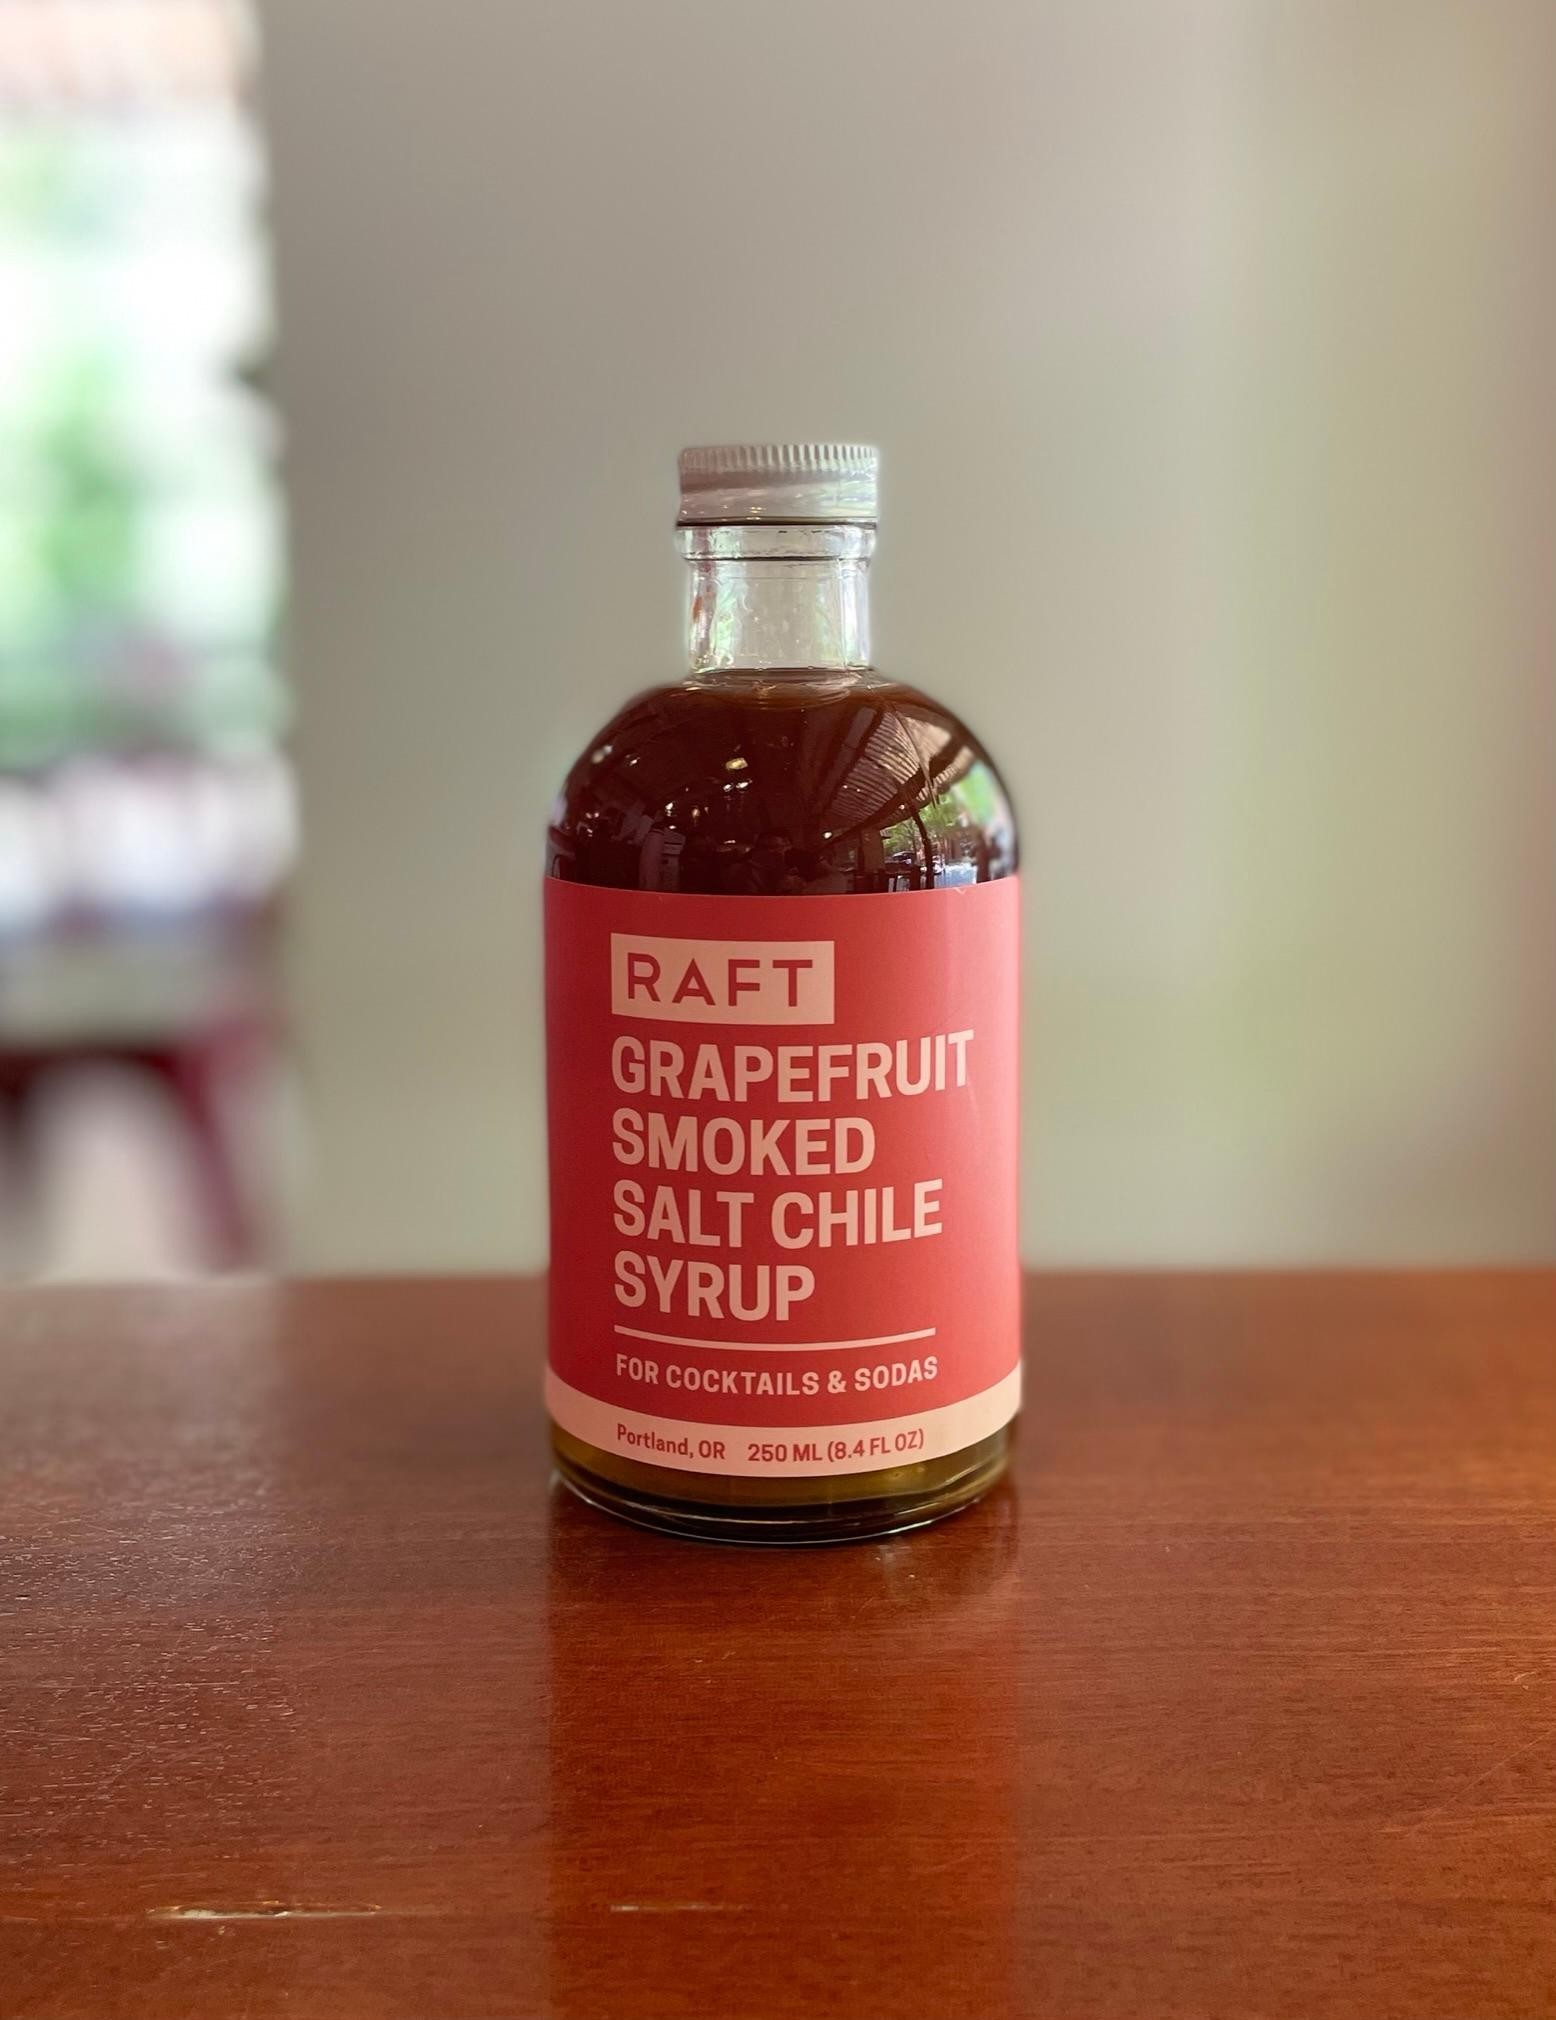 Raft Grapefruit Chile Cocktail Syrup